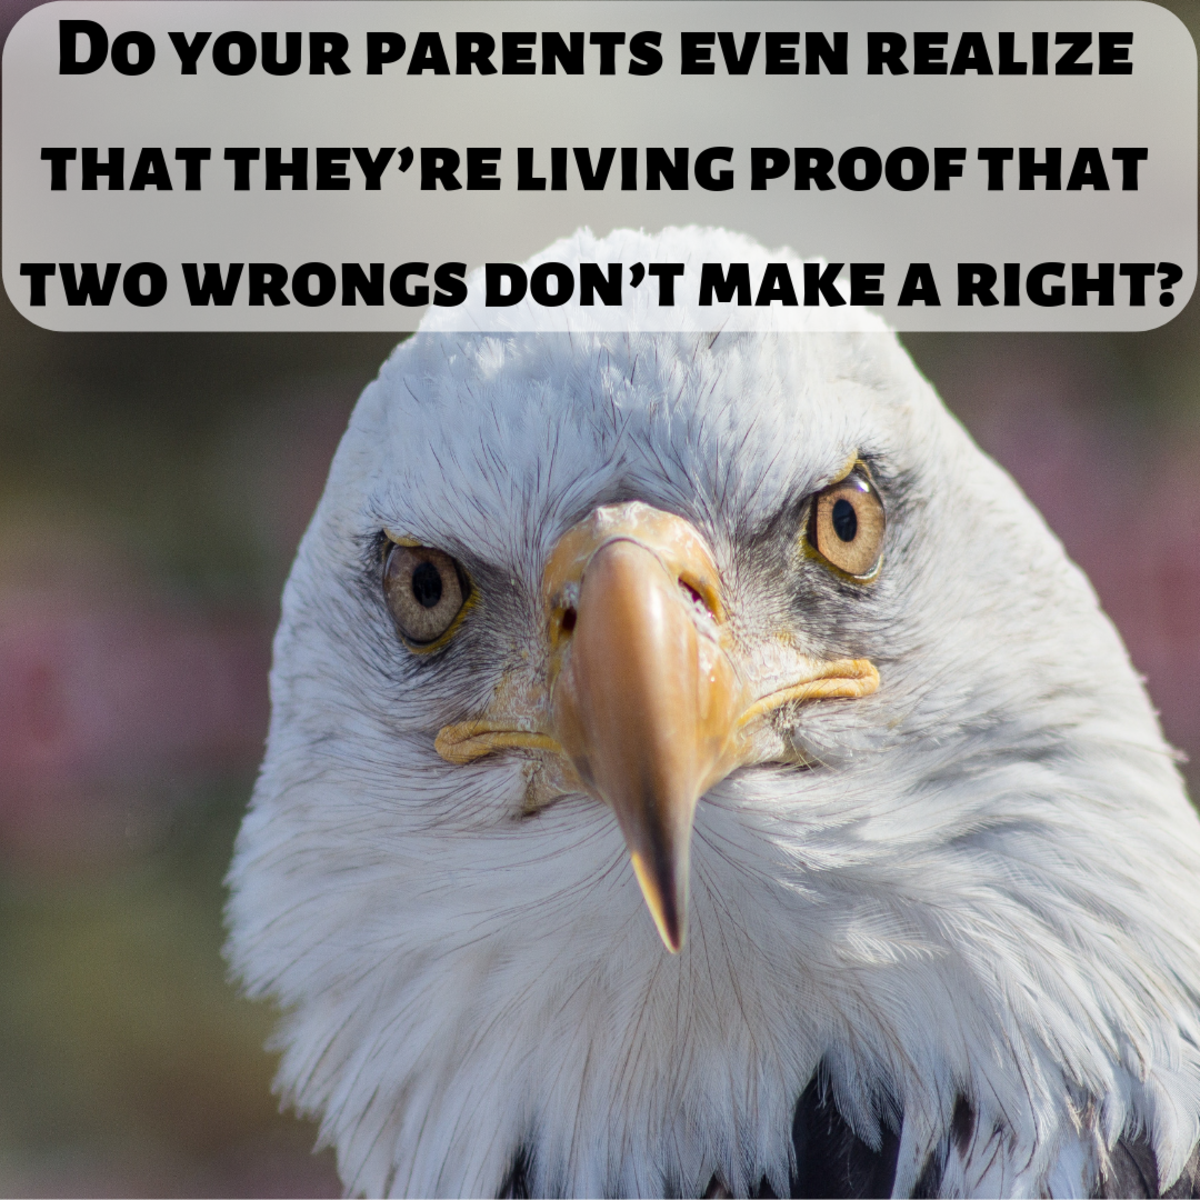 Do your parents realize that they're living proof that two wrongs don't make a right?